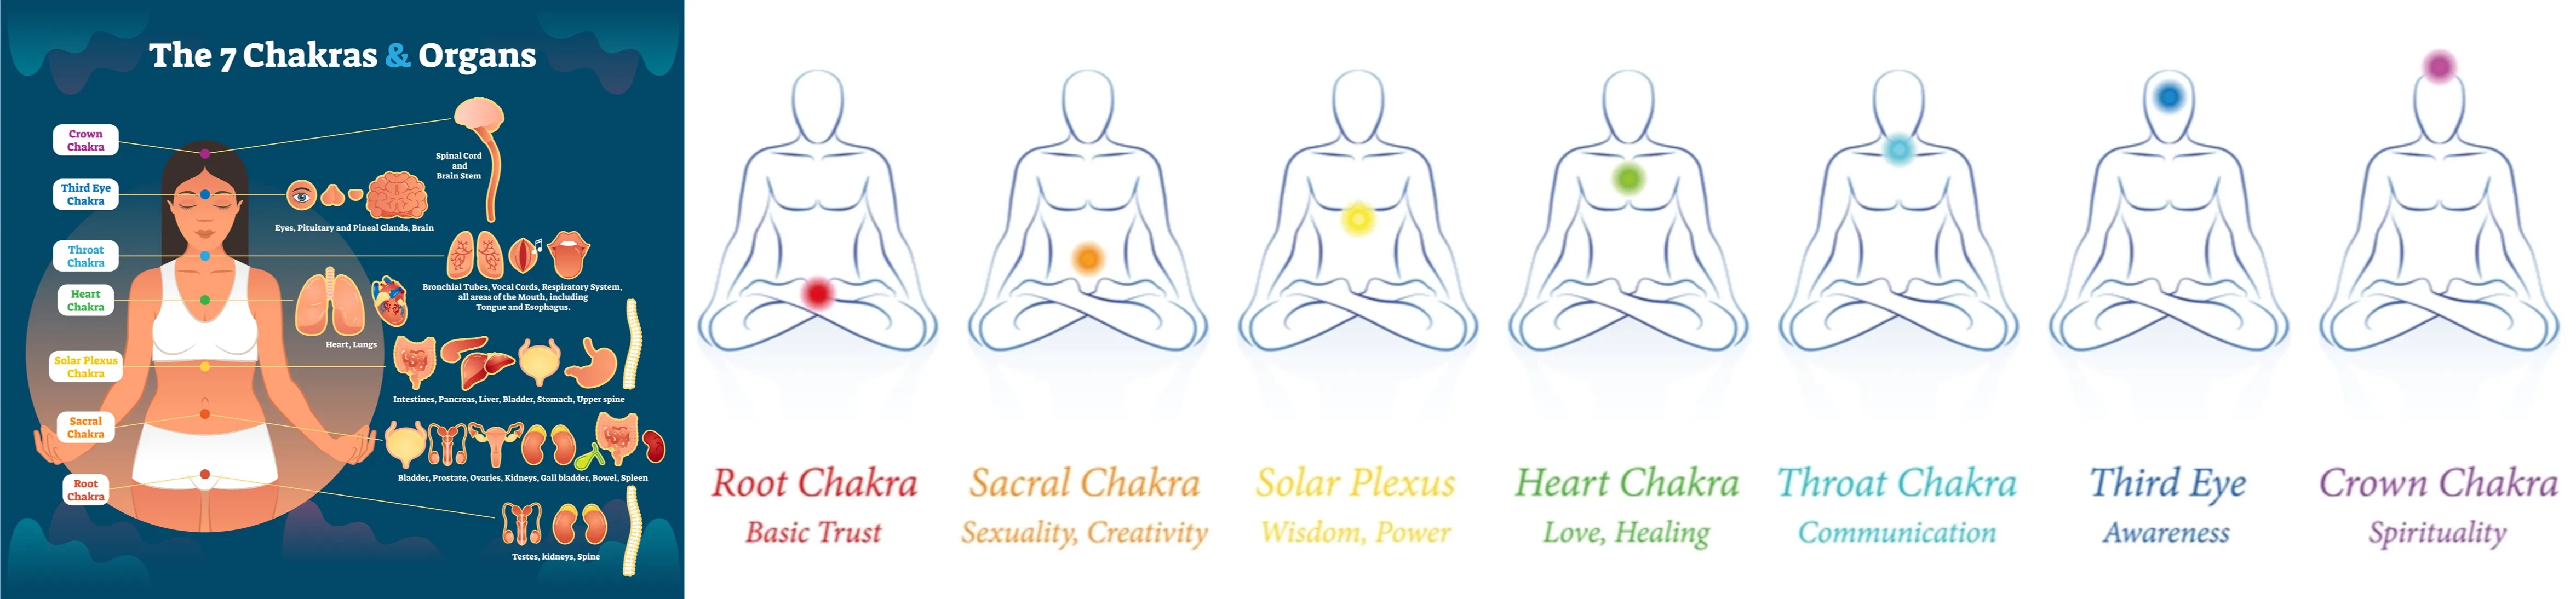 The 7 Chakras (Energy Centers) and organs represent respective influential emotions. (The emotional settings I brought are slightly broader.)